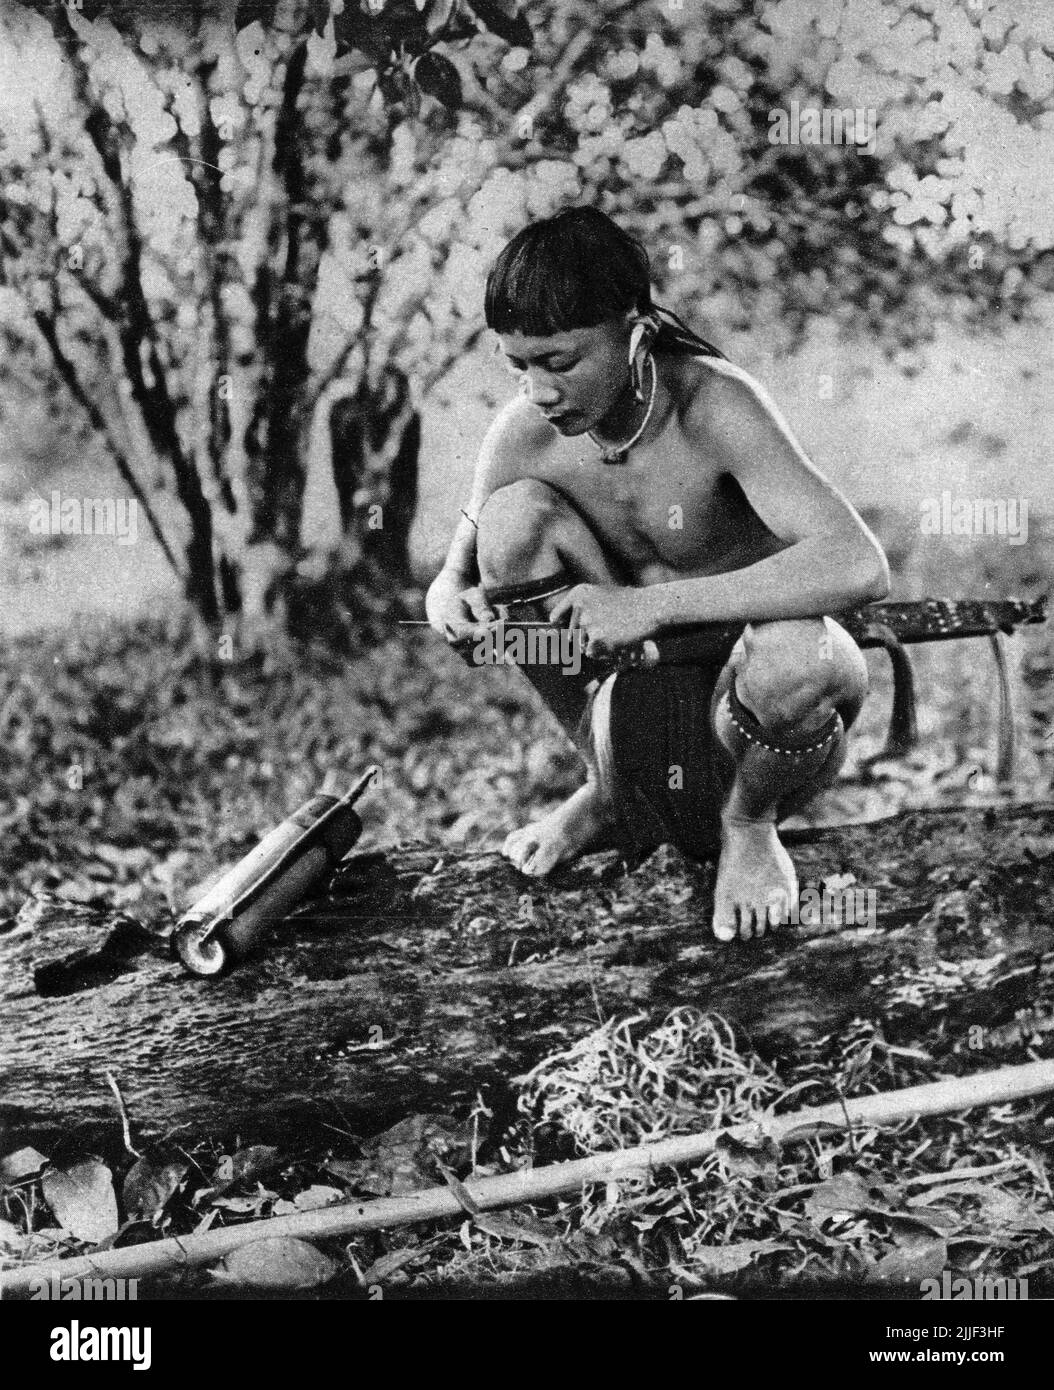 A Dayak man from Bornoe makes a poison dart for his blowpipe, using stems from the Bertram Palm; Image published 1929. Stock Photo